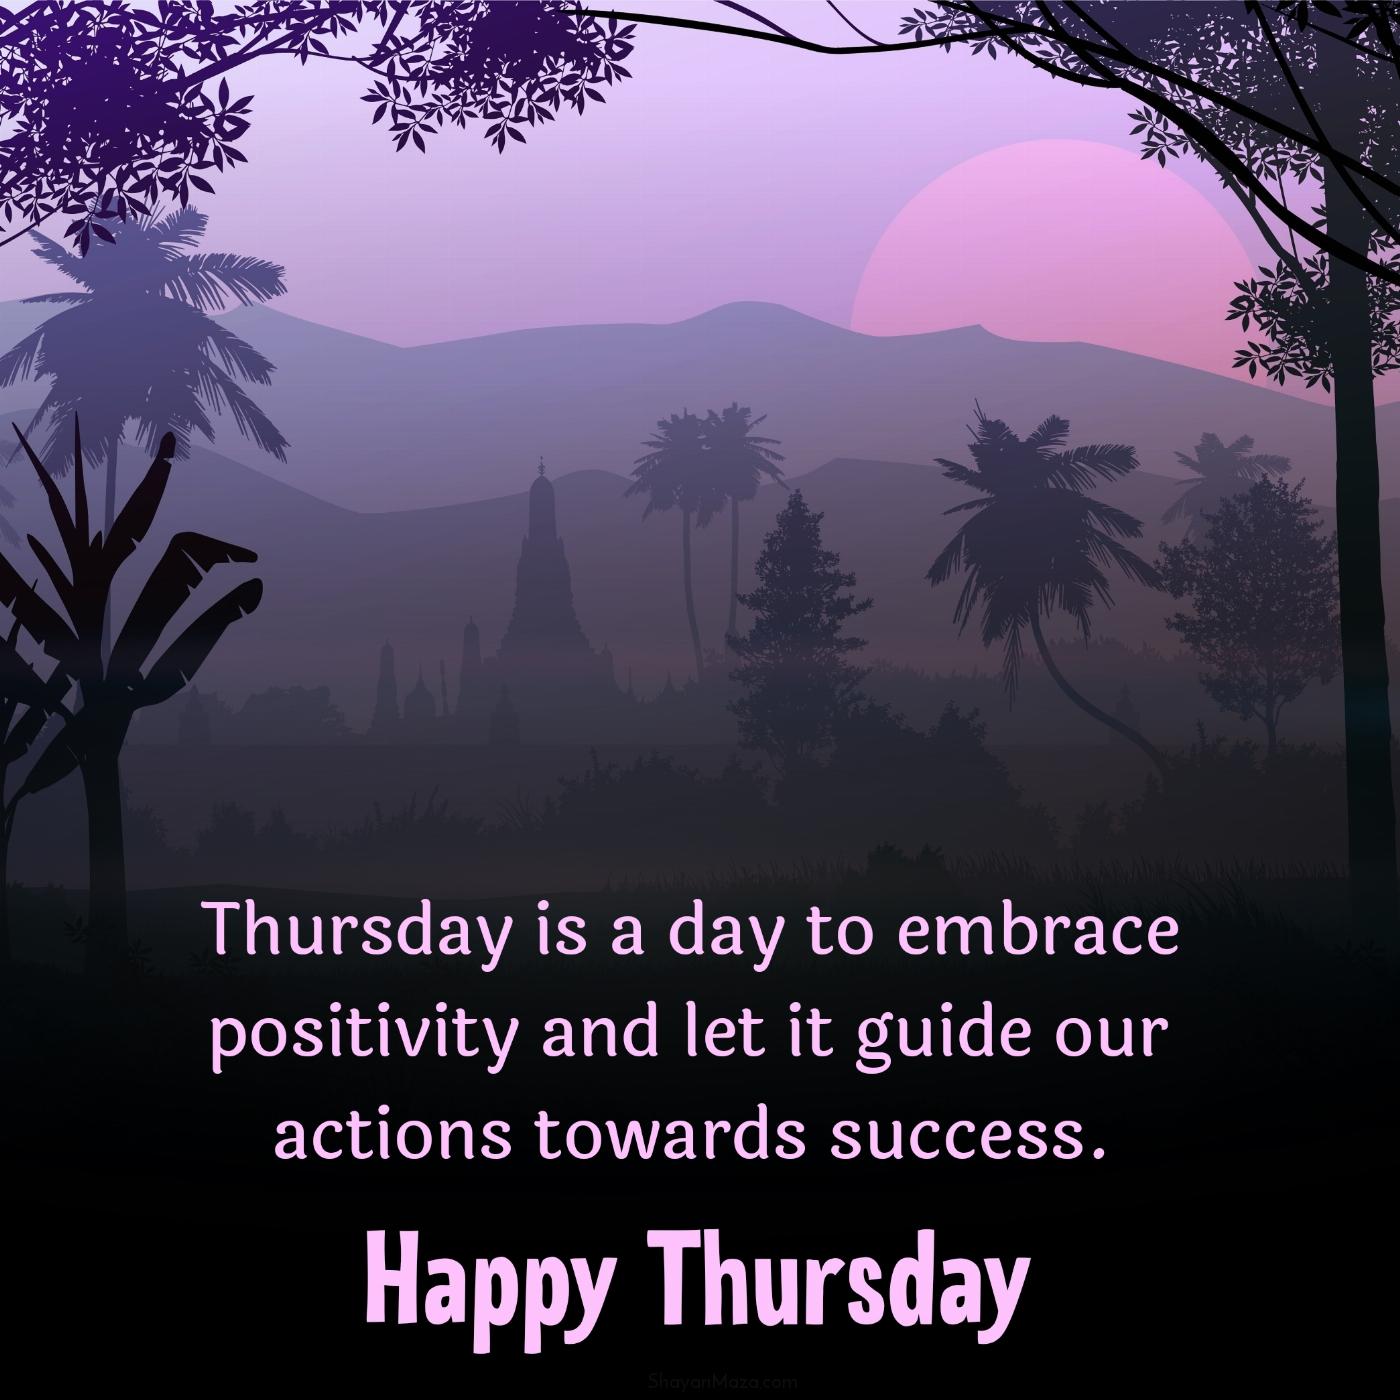 Thursday is a day to embrace positivity and let it guide